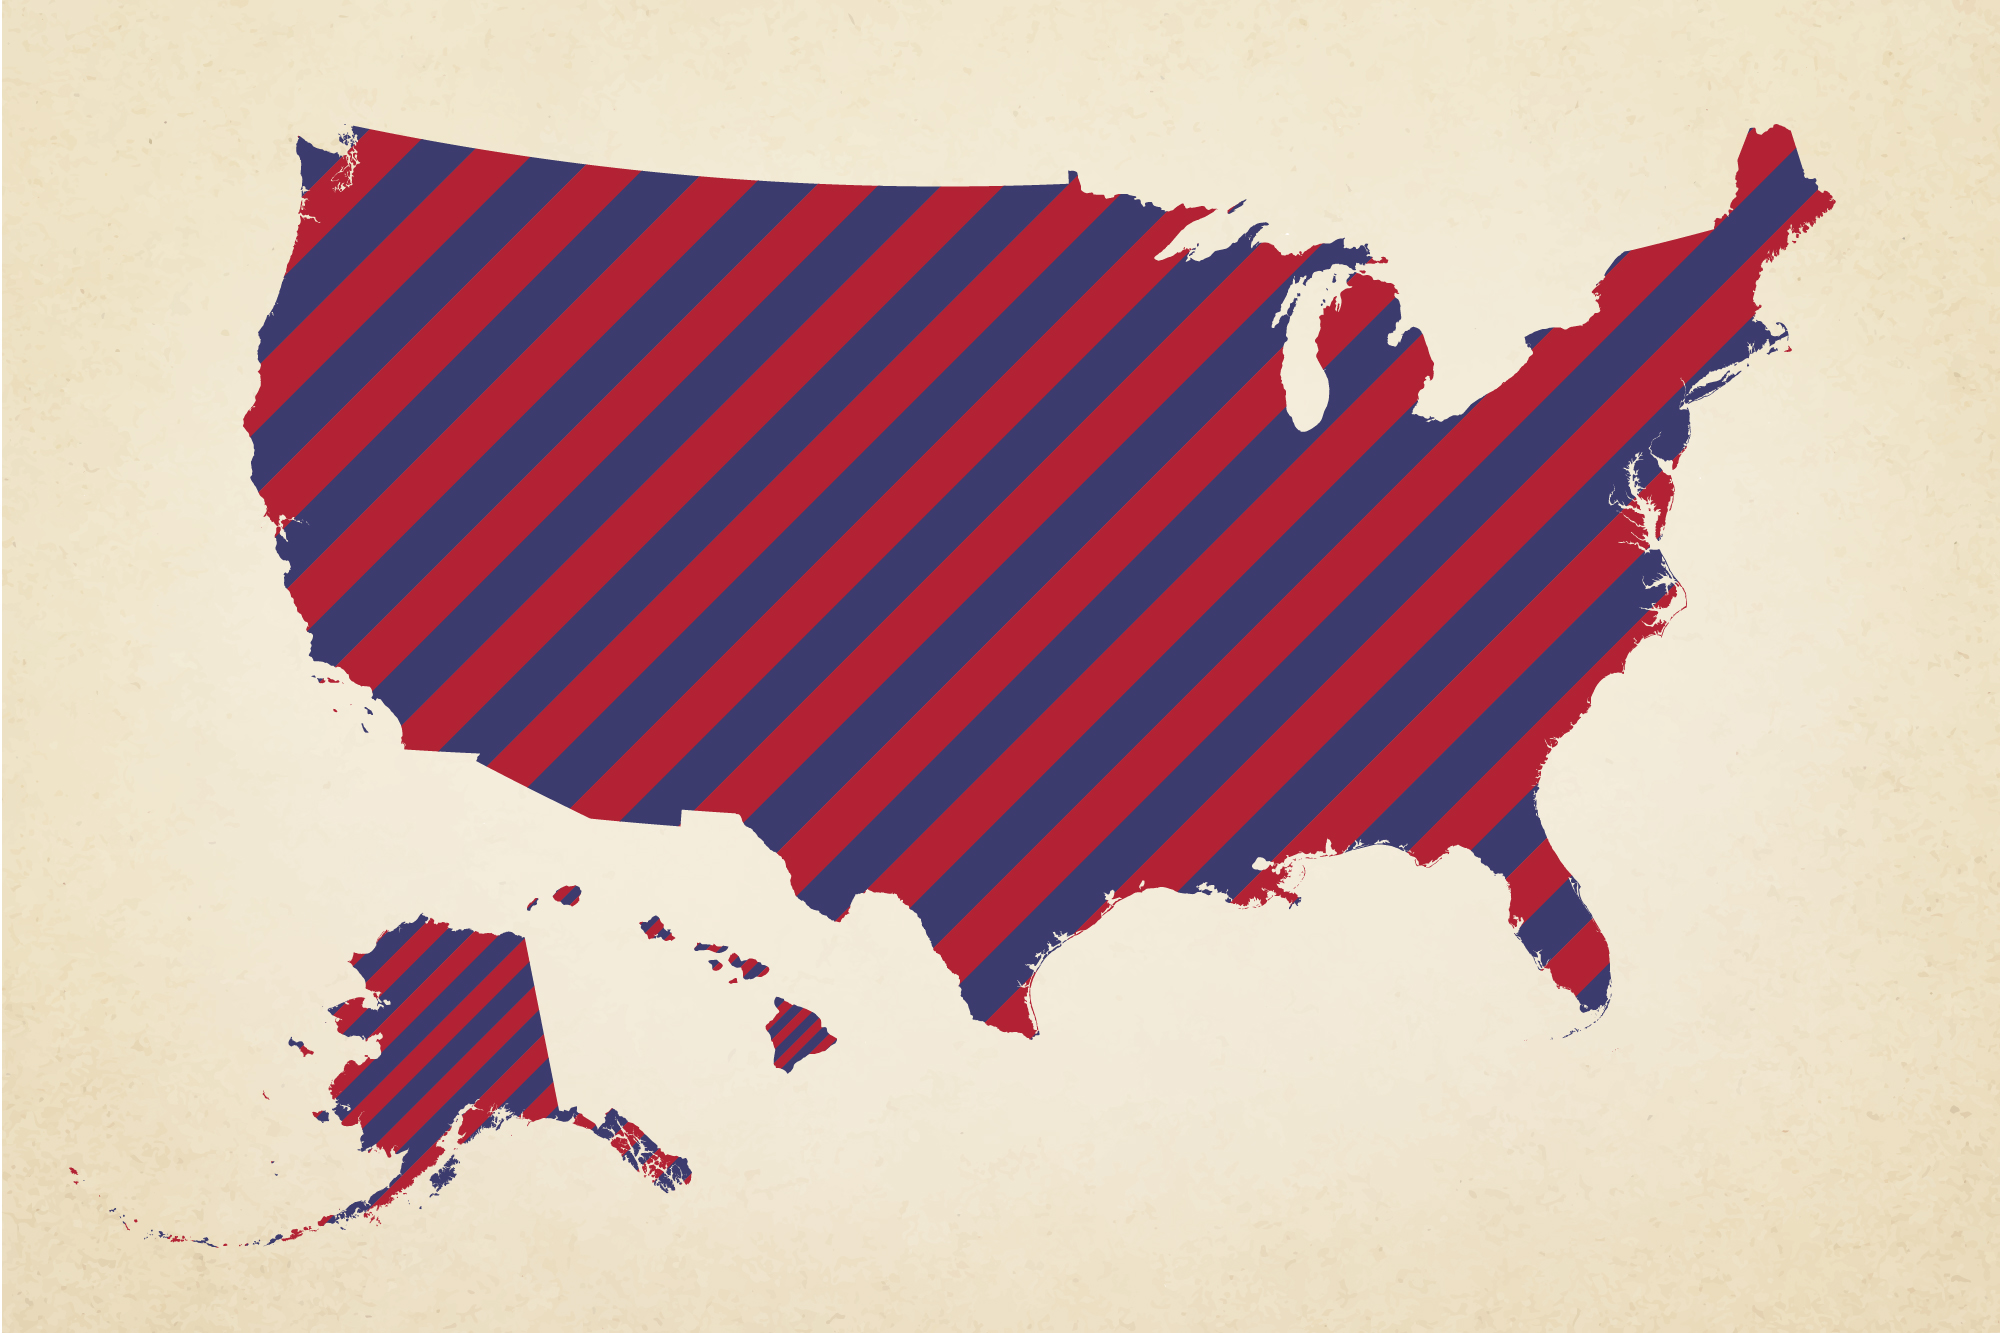 Map of the USA with Red and Blue Stripes